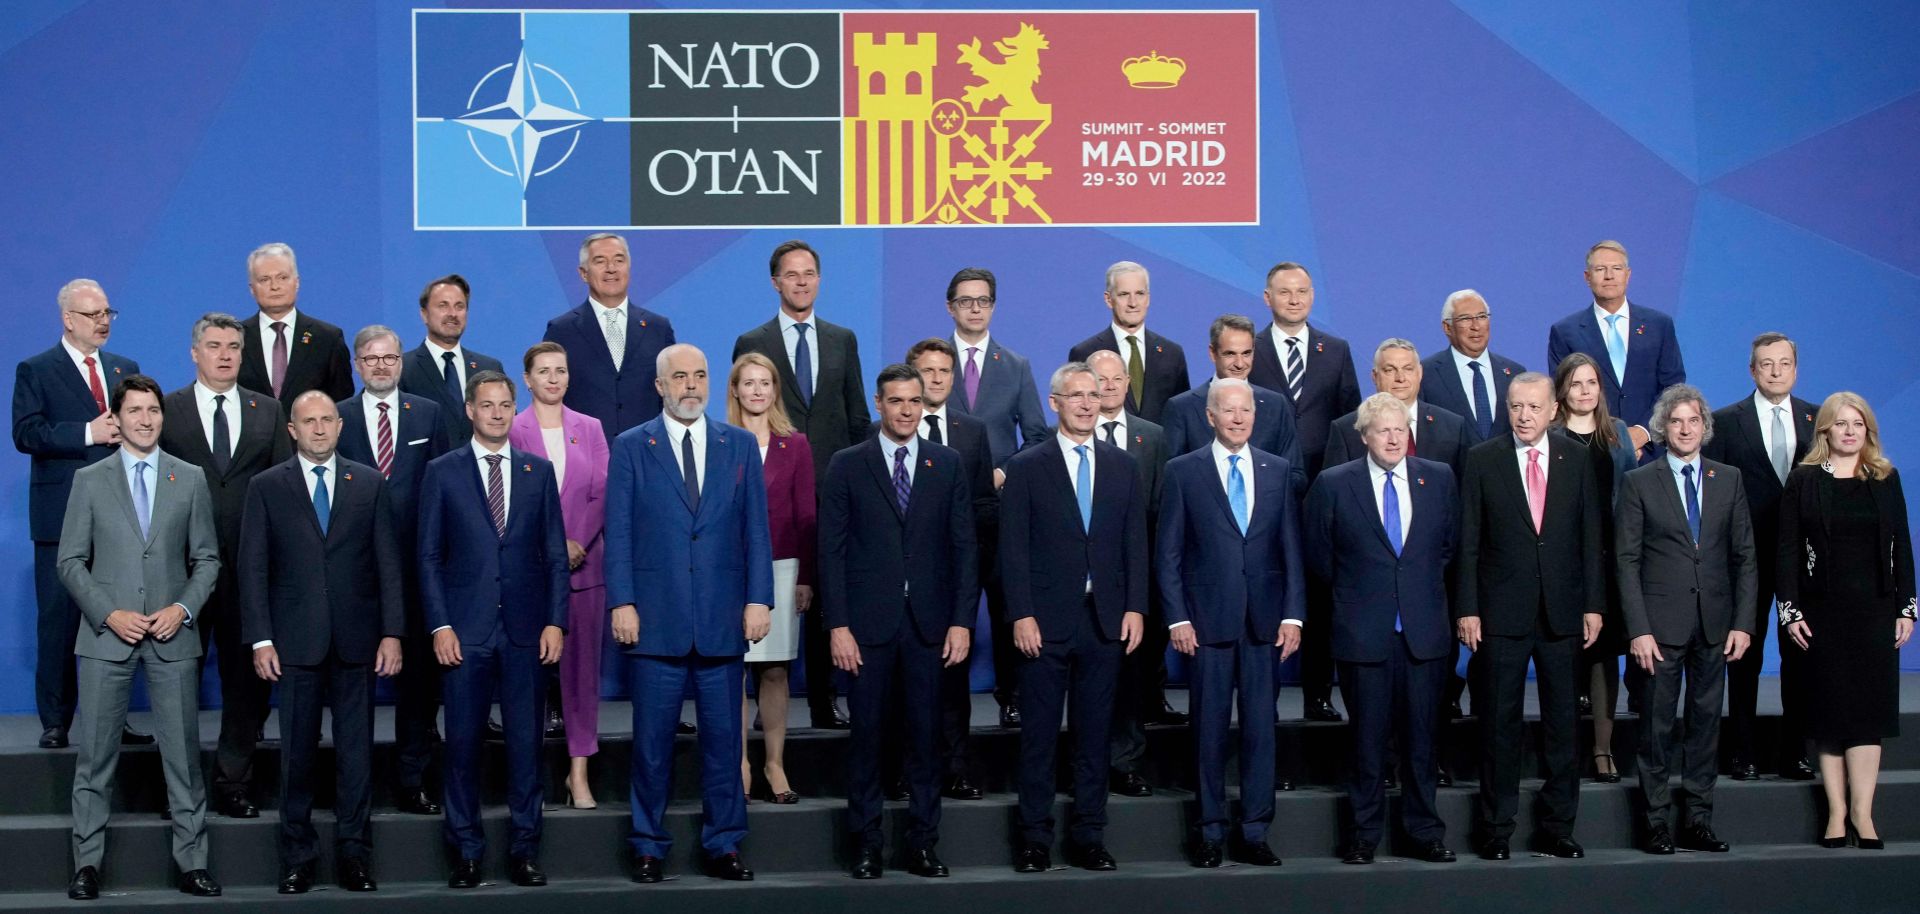 Heads of state pose for a group photo at the NATO summit in Madrid, Spain, on June 29, 2022. 